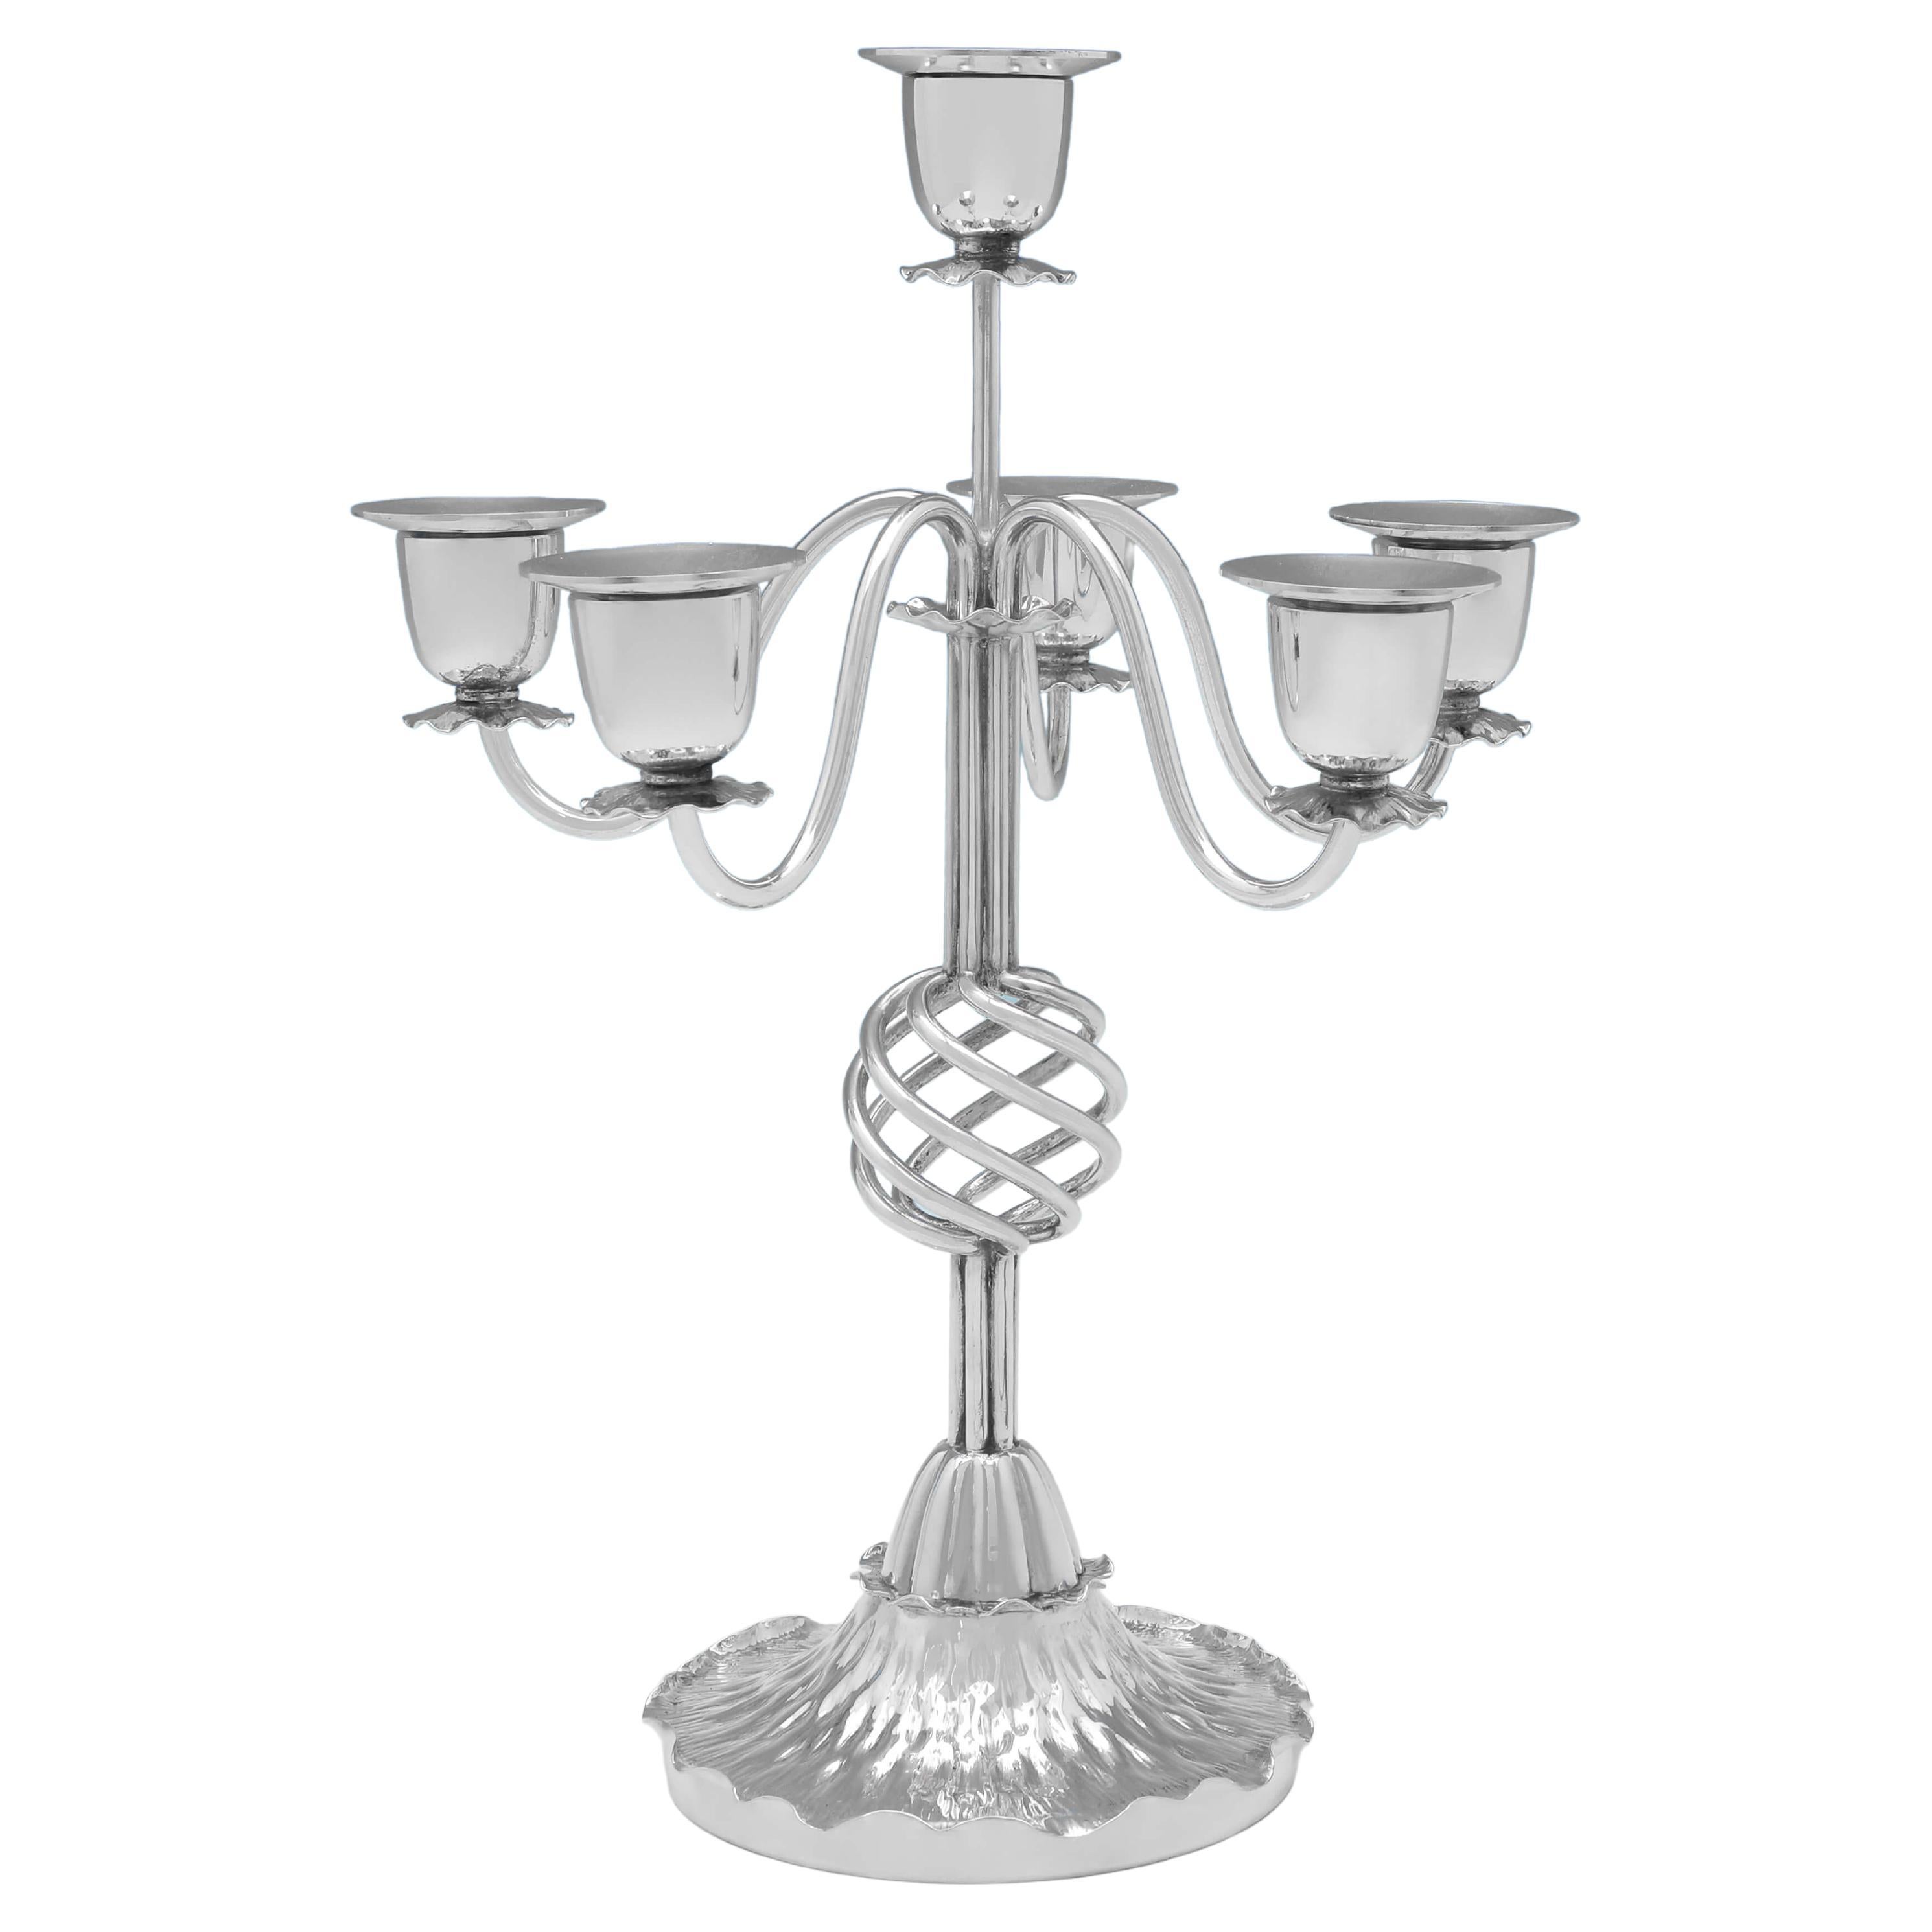 Aesthetic Period Antique Silver Plate Candelabrum by Hukin & Heath, Circa 1880 For Sale